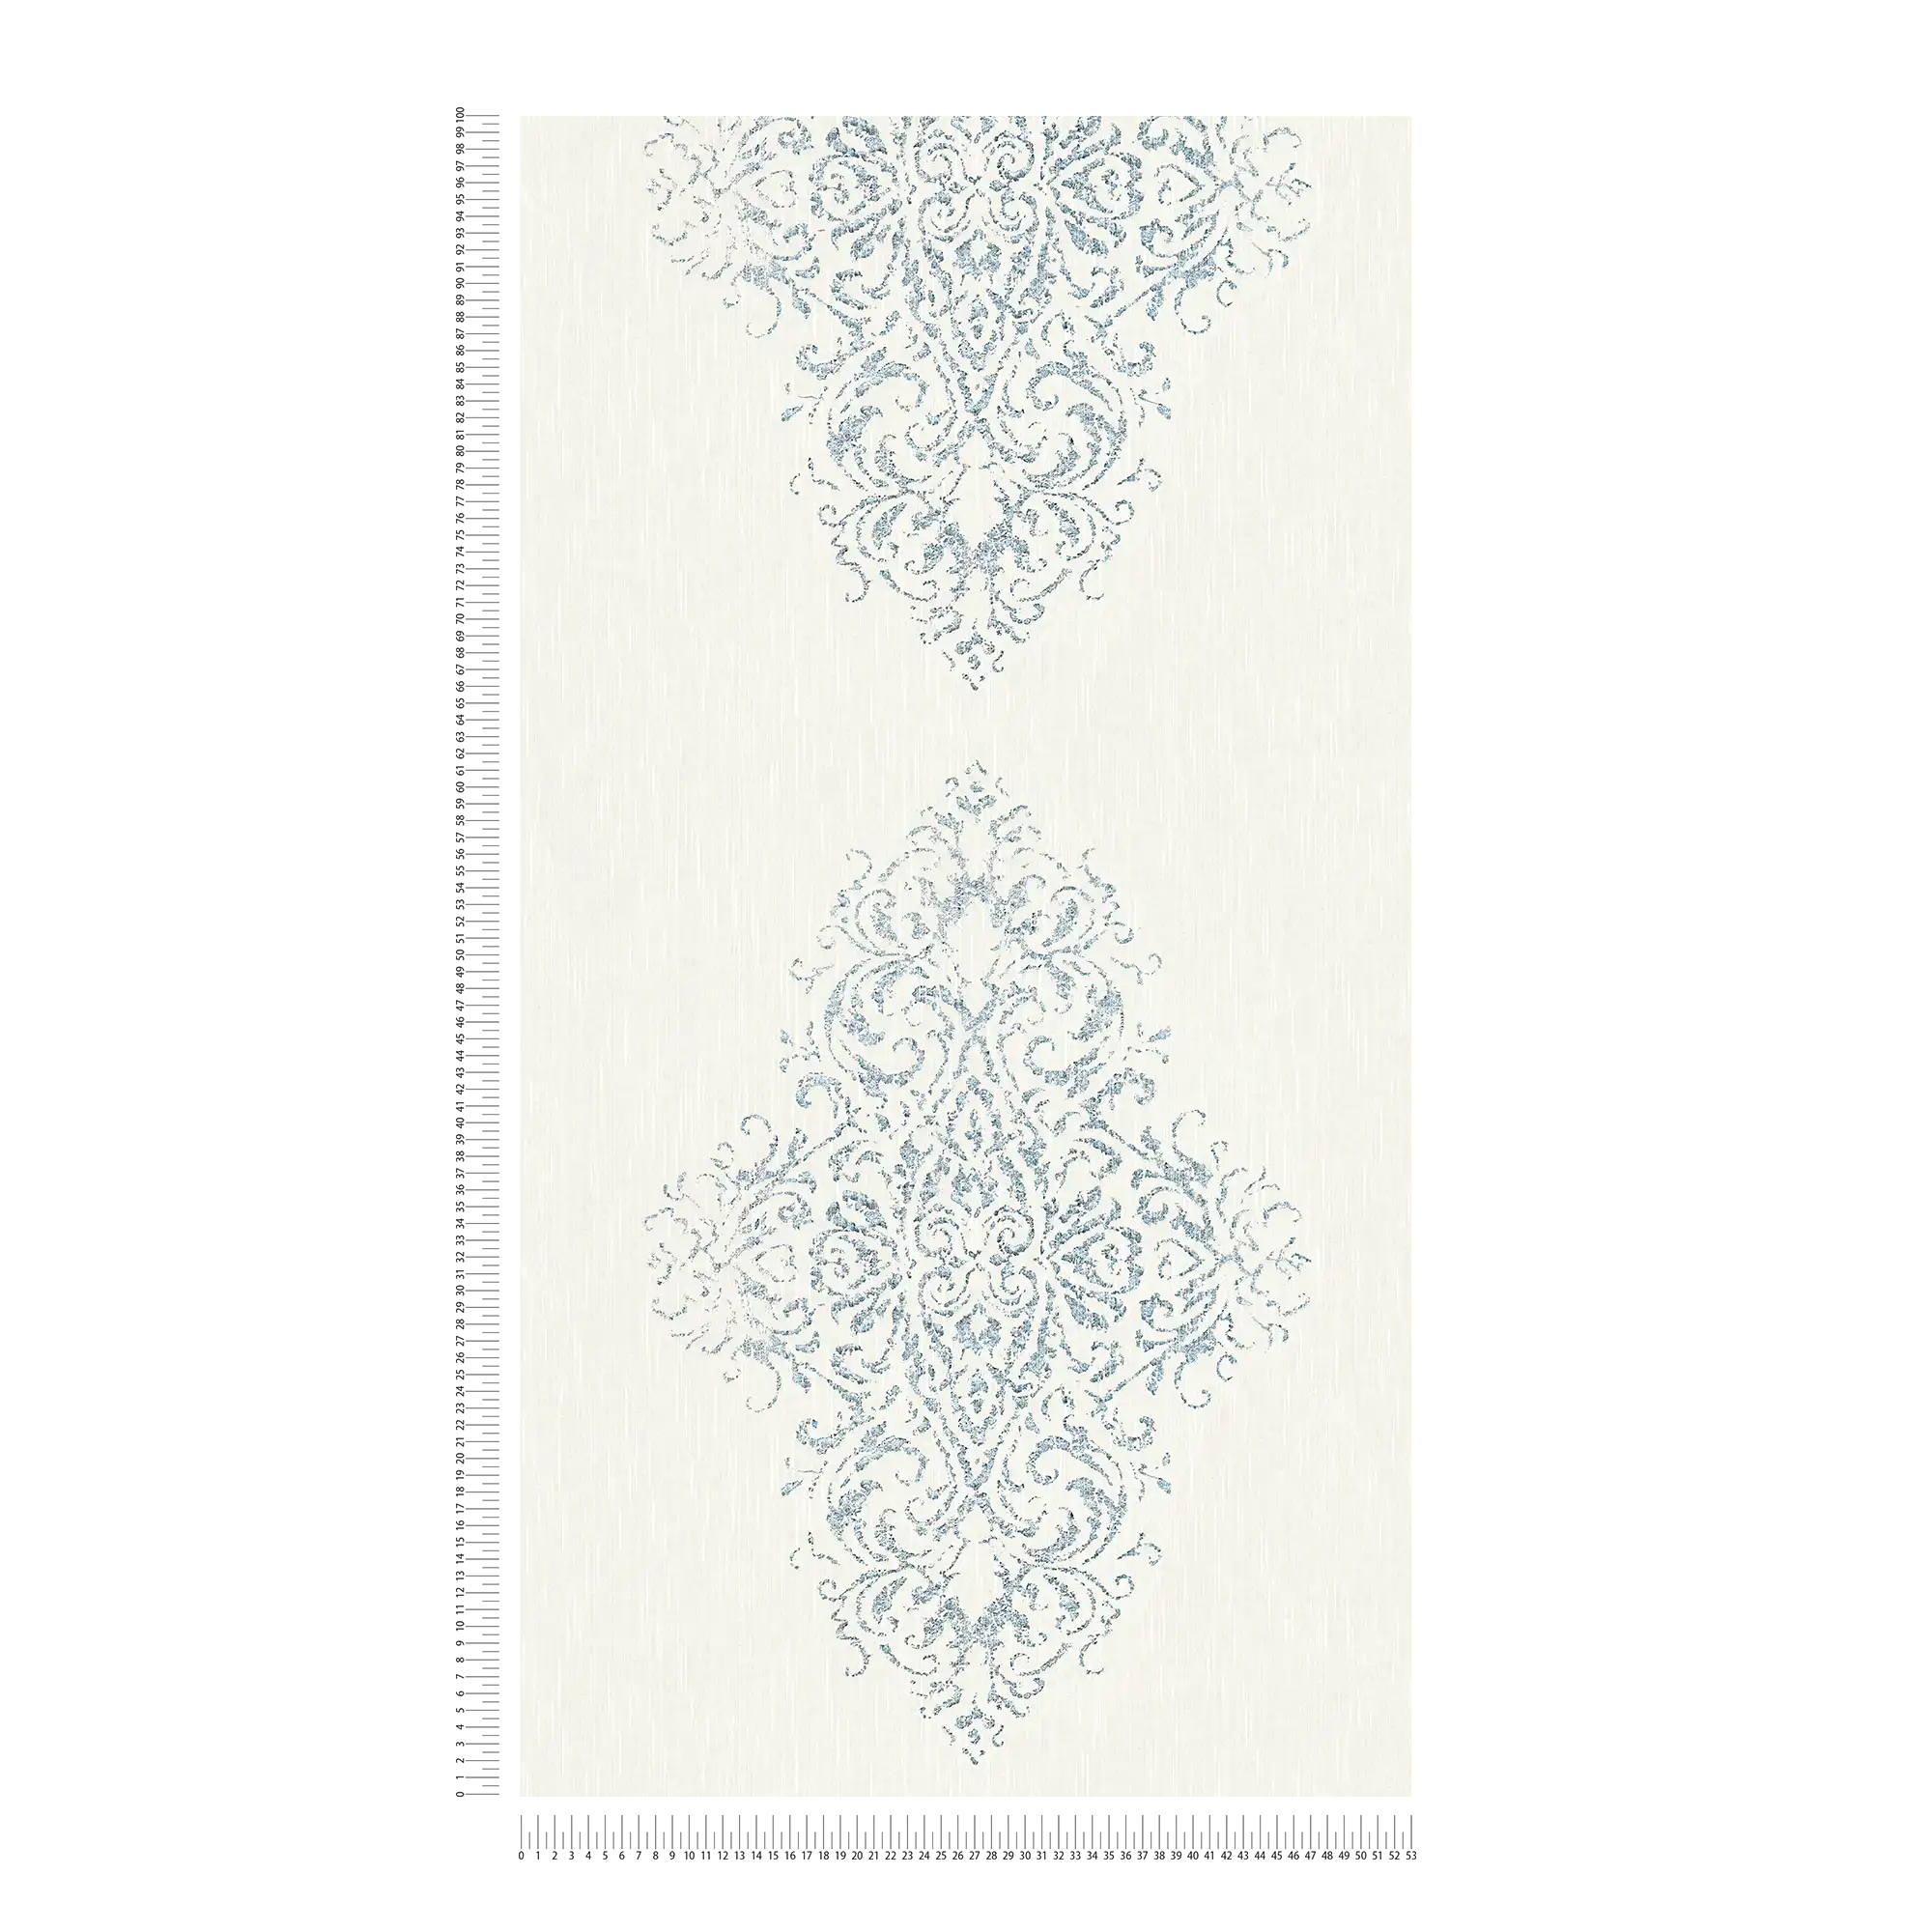             Ornament wallpaper with metallic effect in used look - white, silver, blue
        